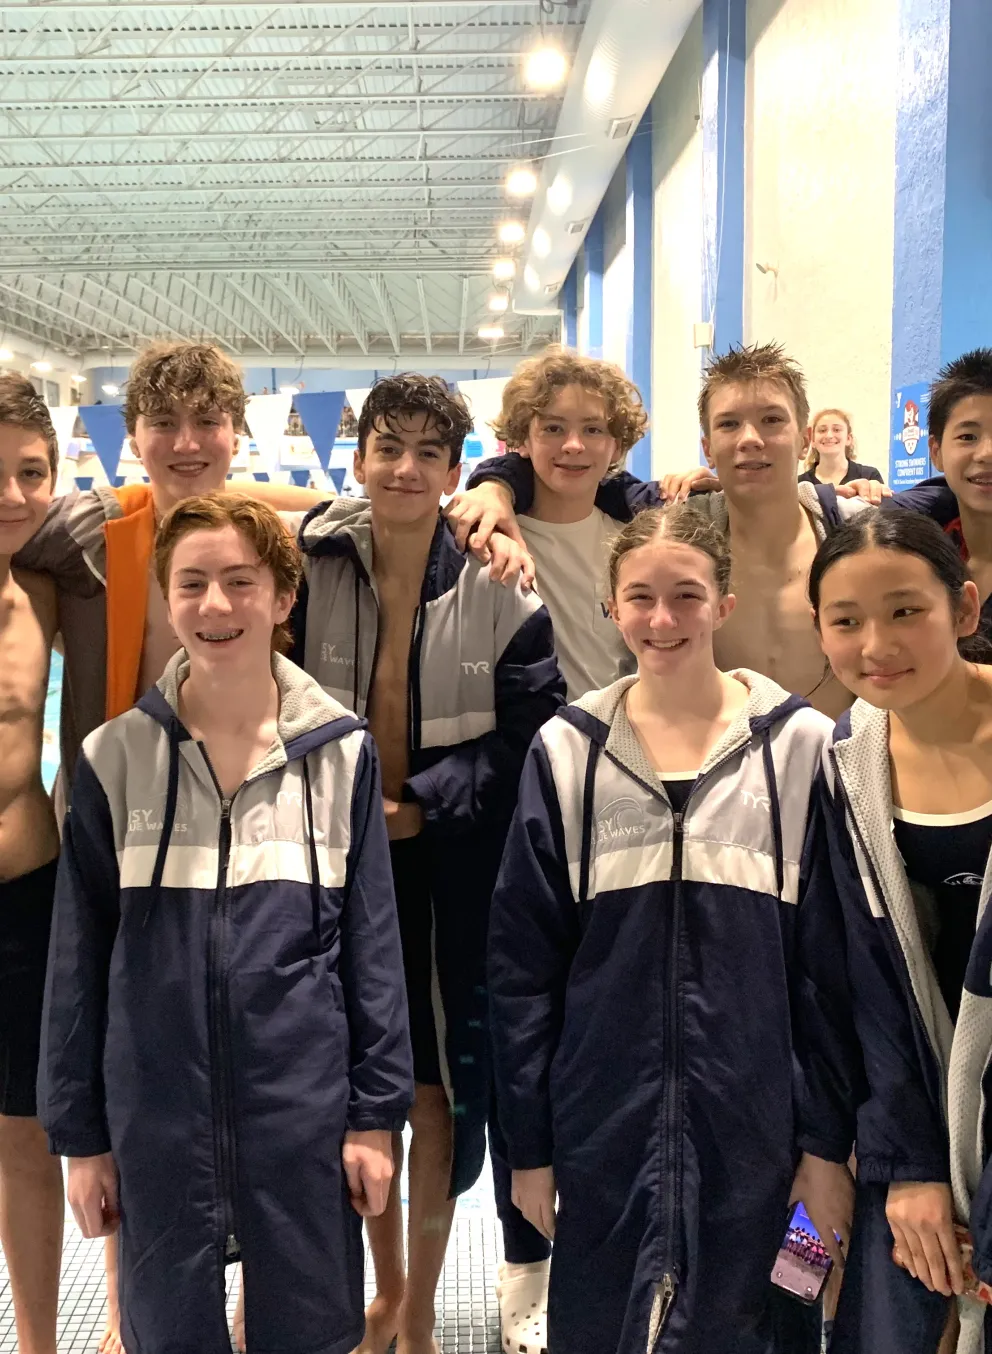 Blue Waves swim team for the WSYMCA